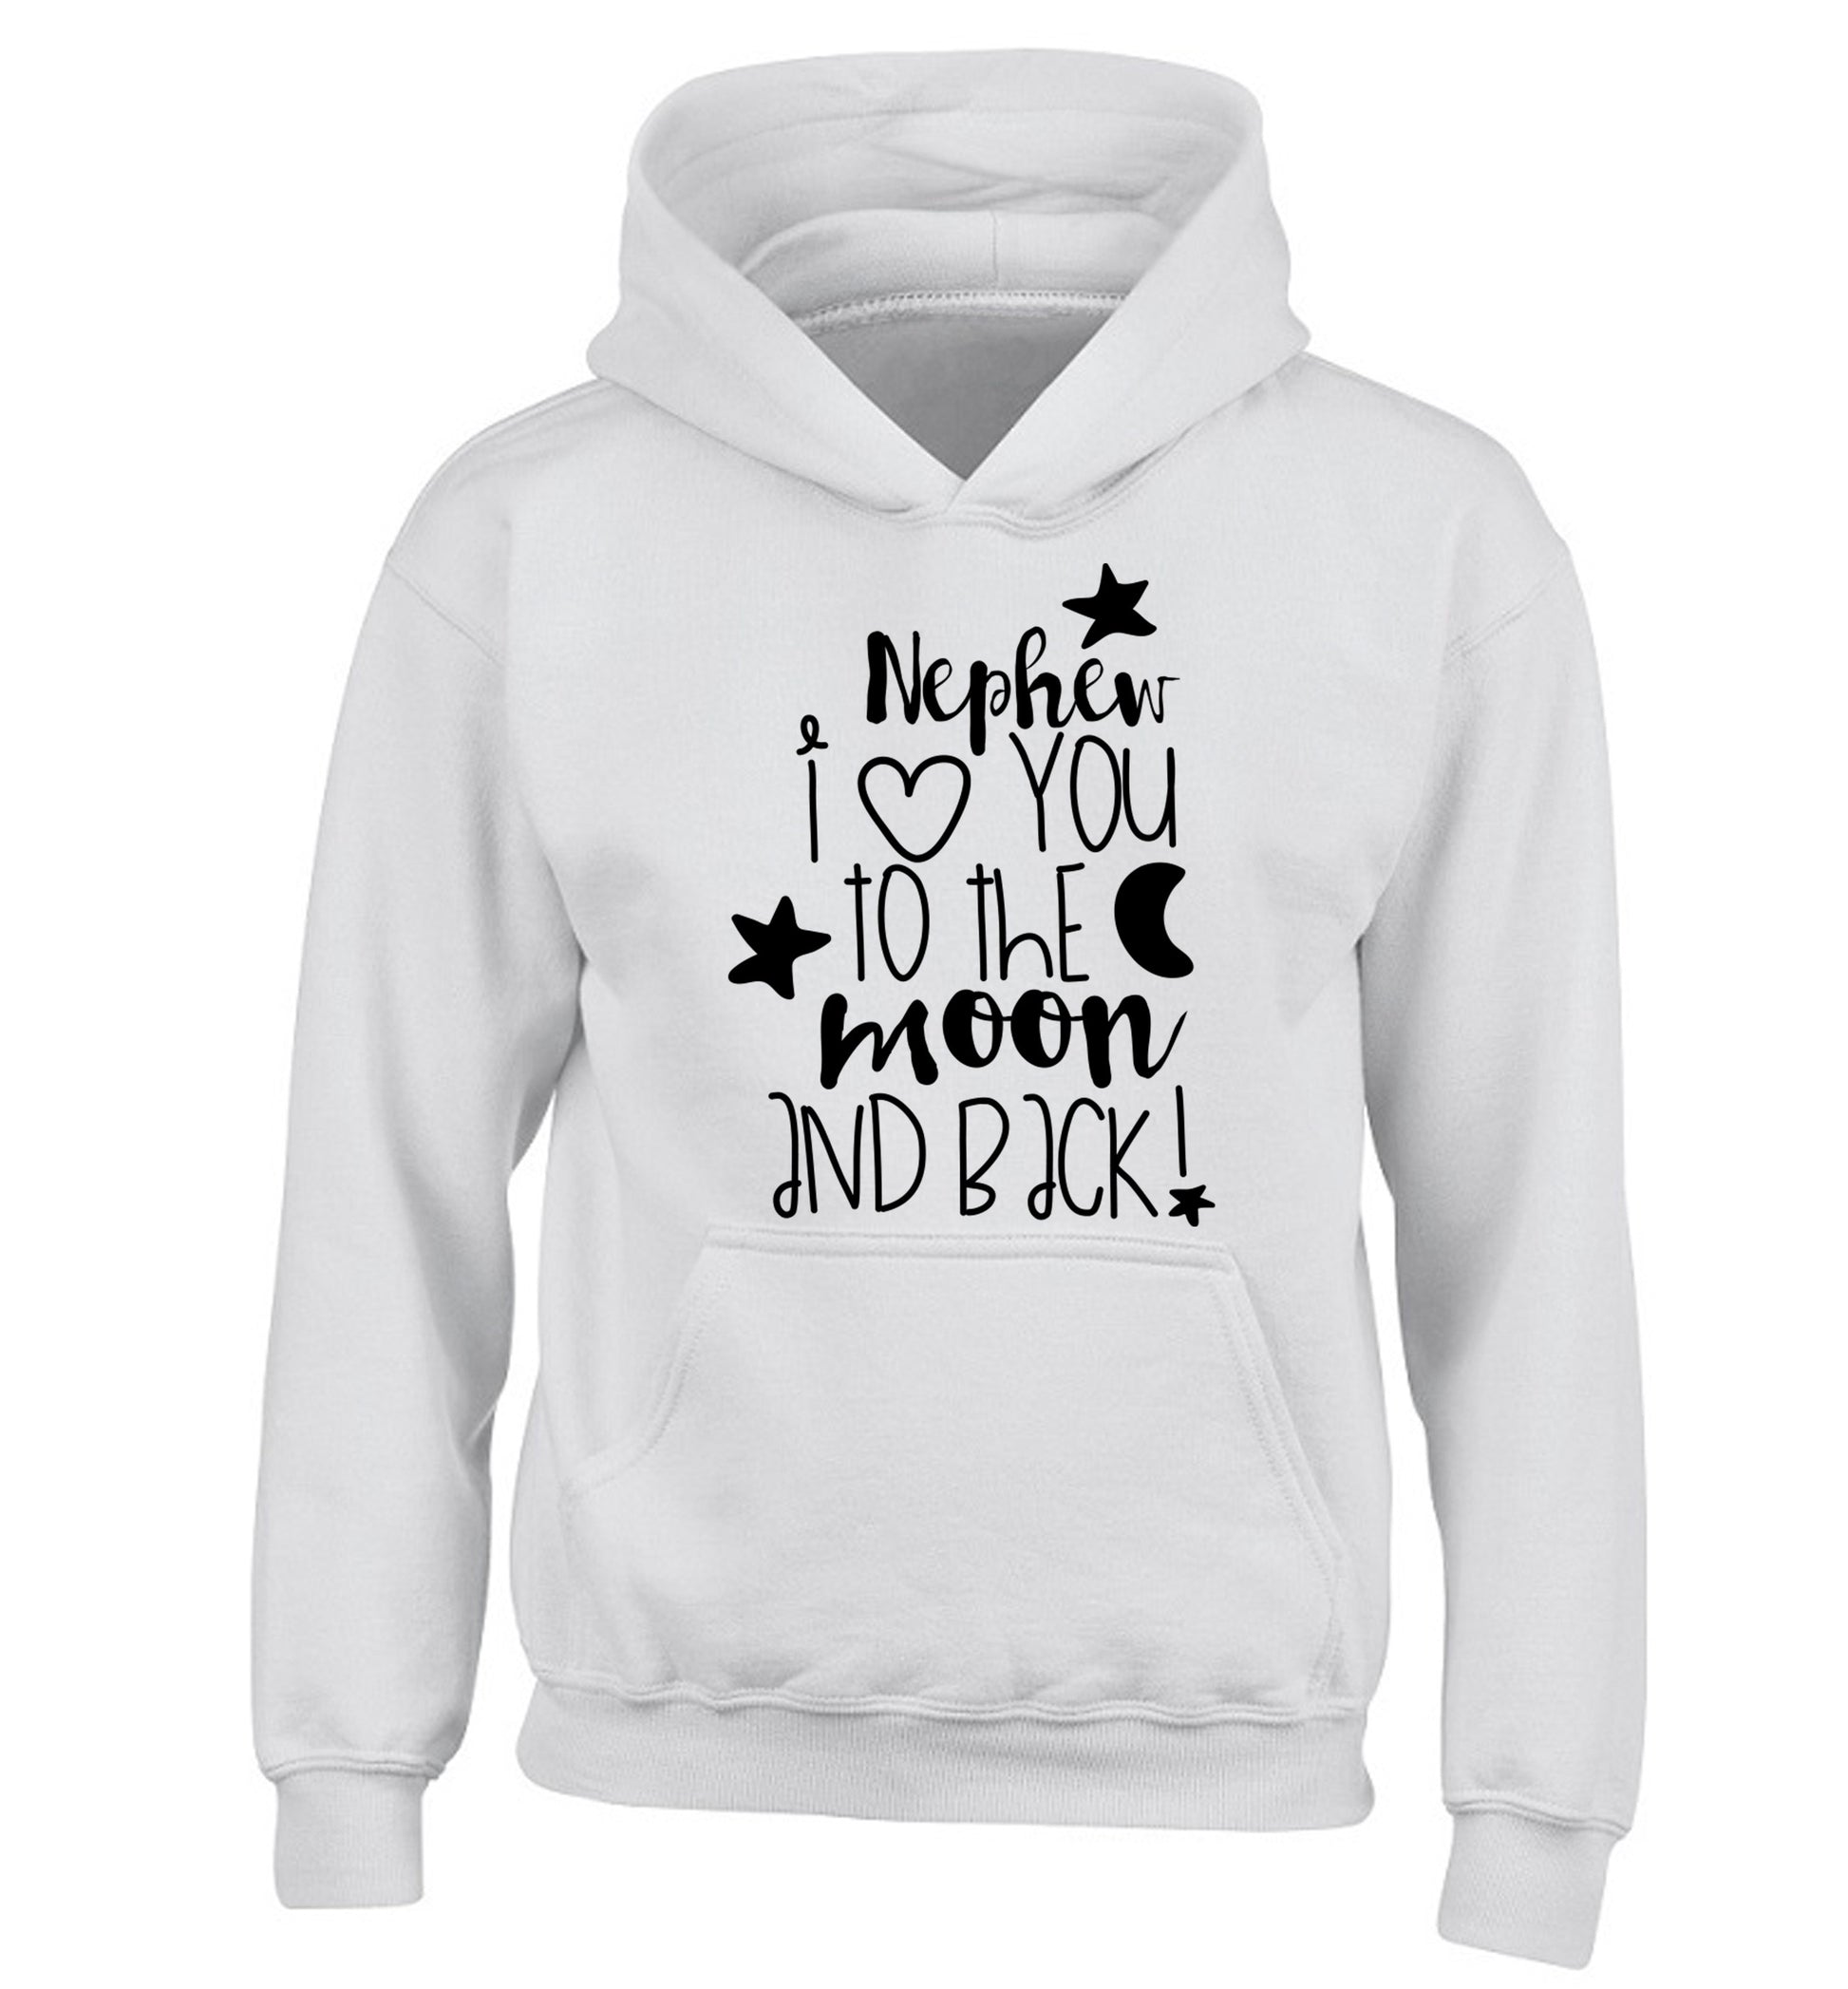 Nephew I love you to the moon and back children's white hoodie 12-14 Years